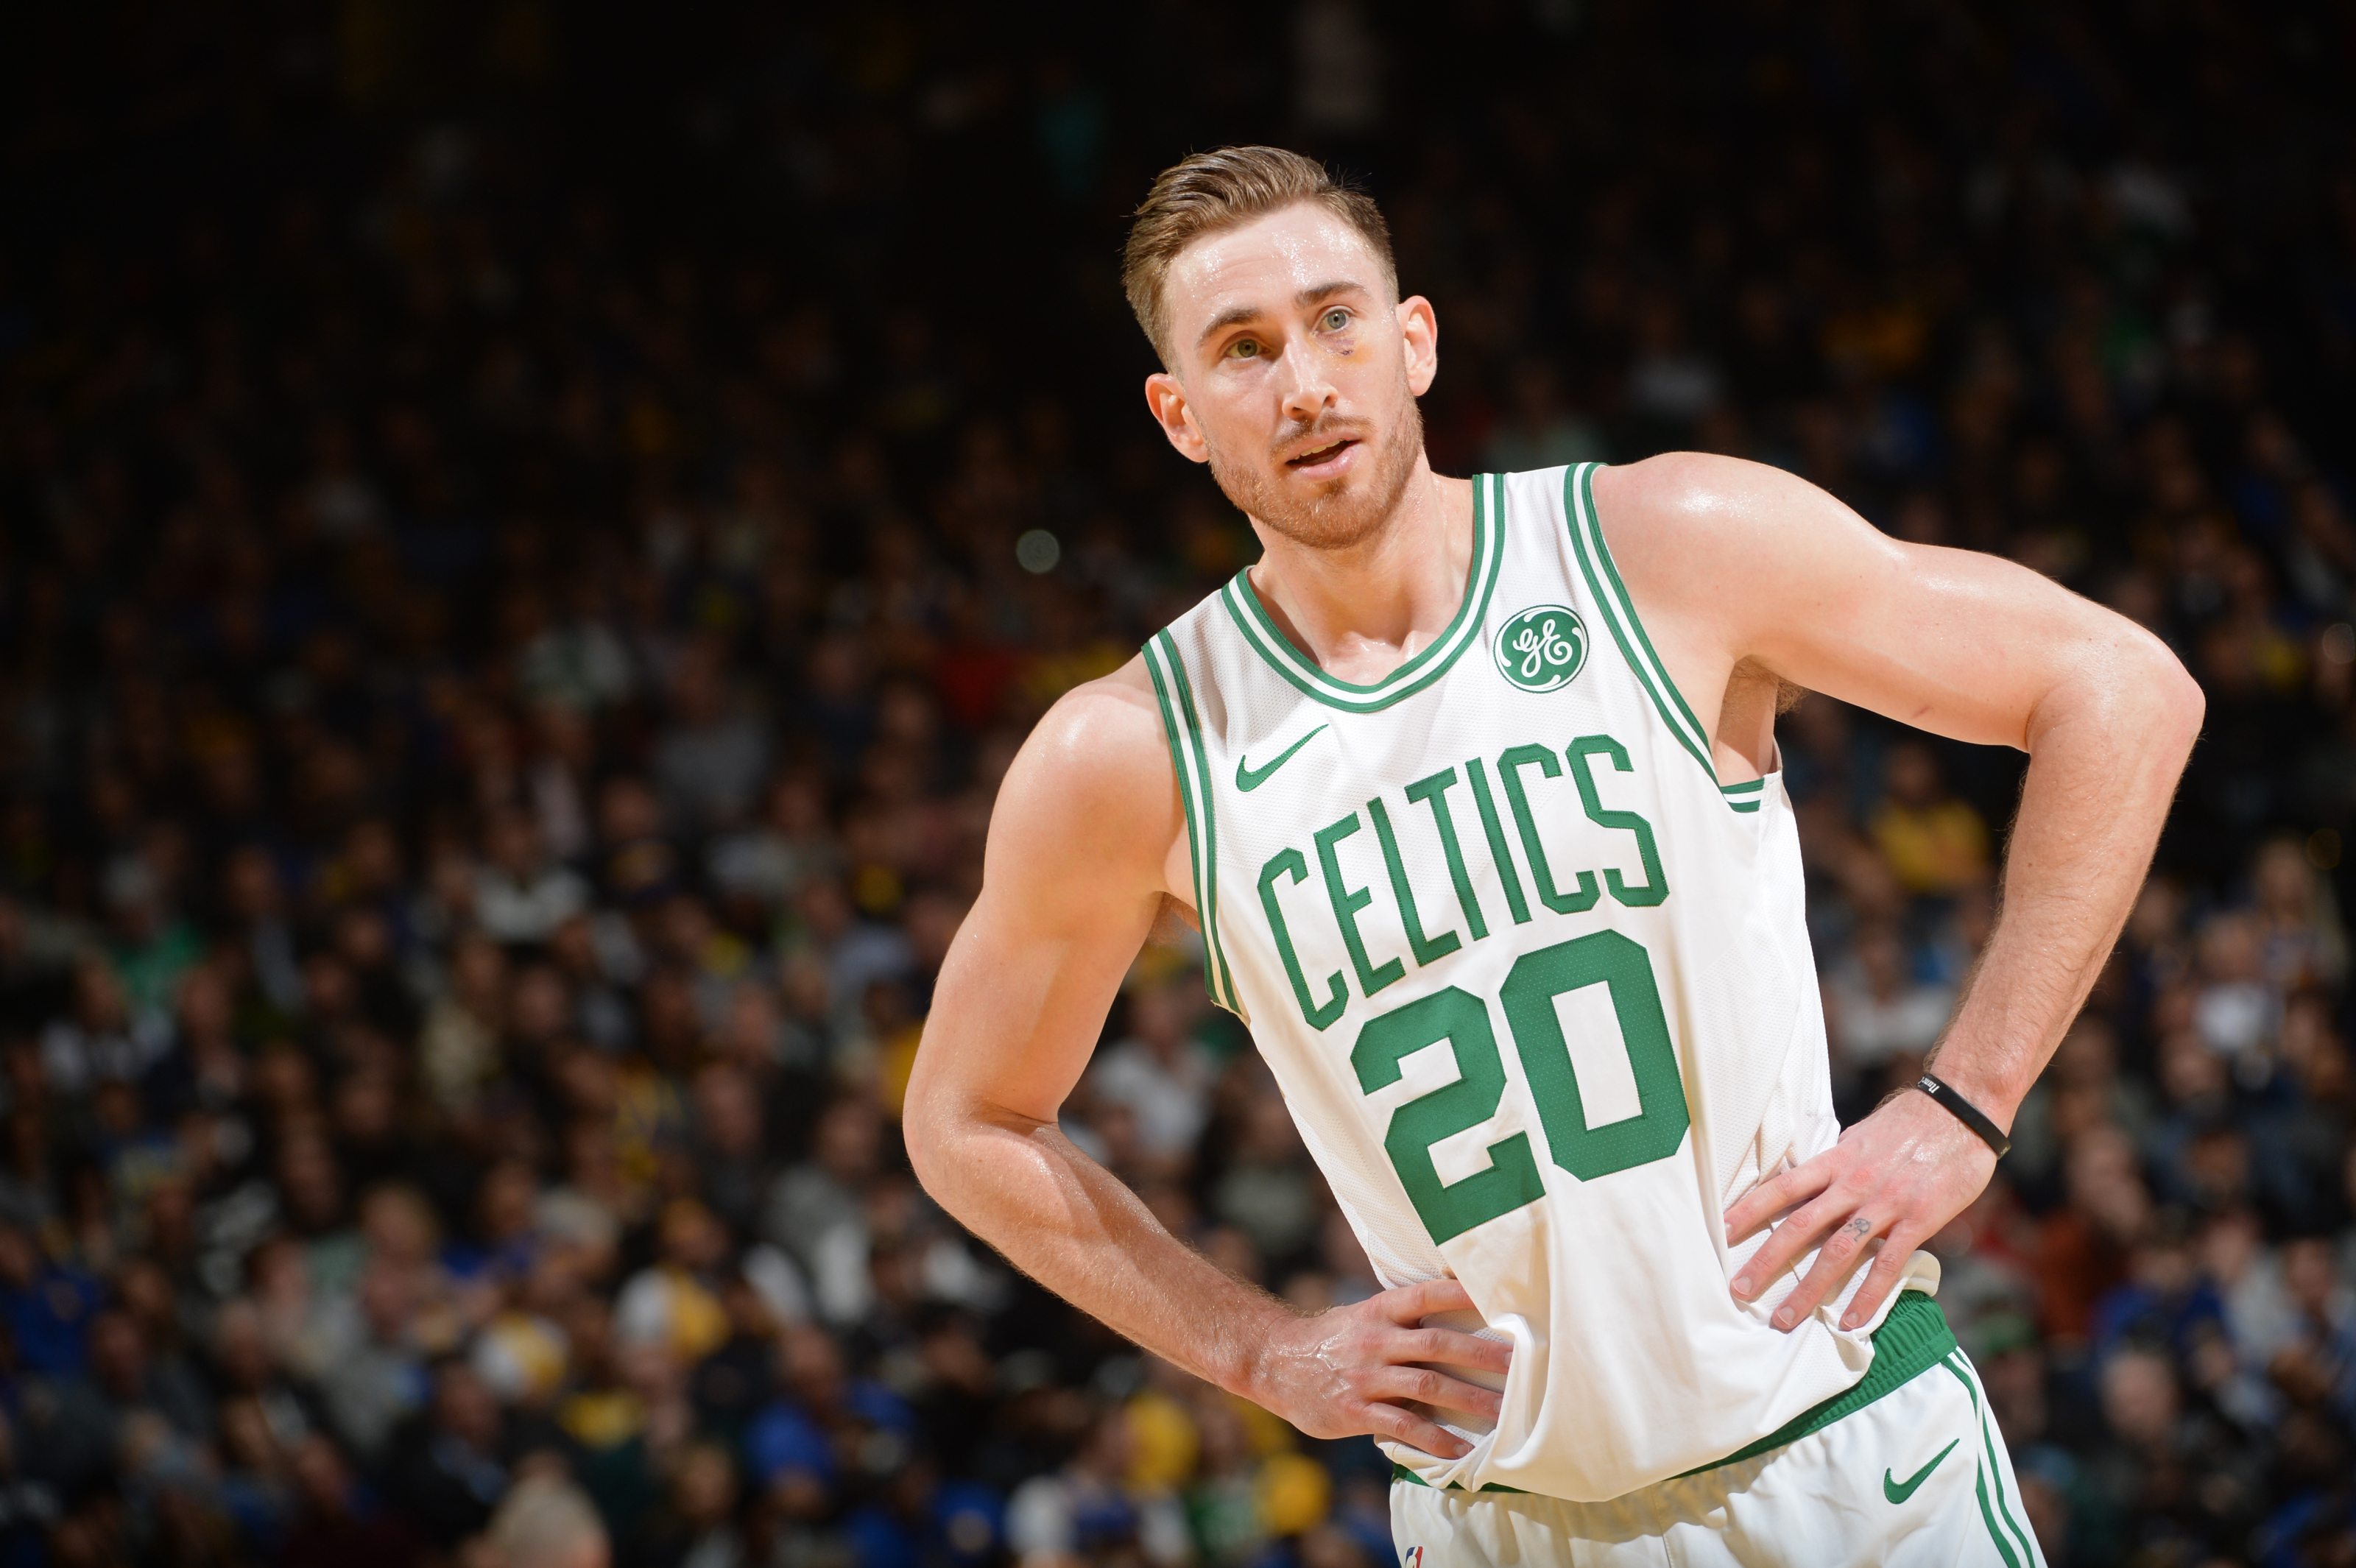 Celtics give Gordon Hayward No. 20, give further evidence of their